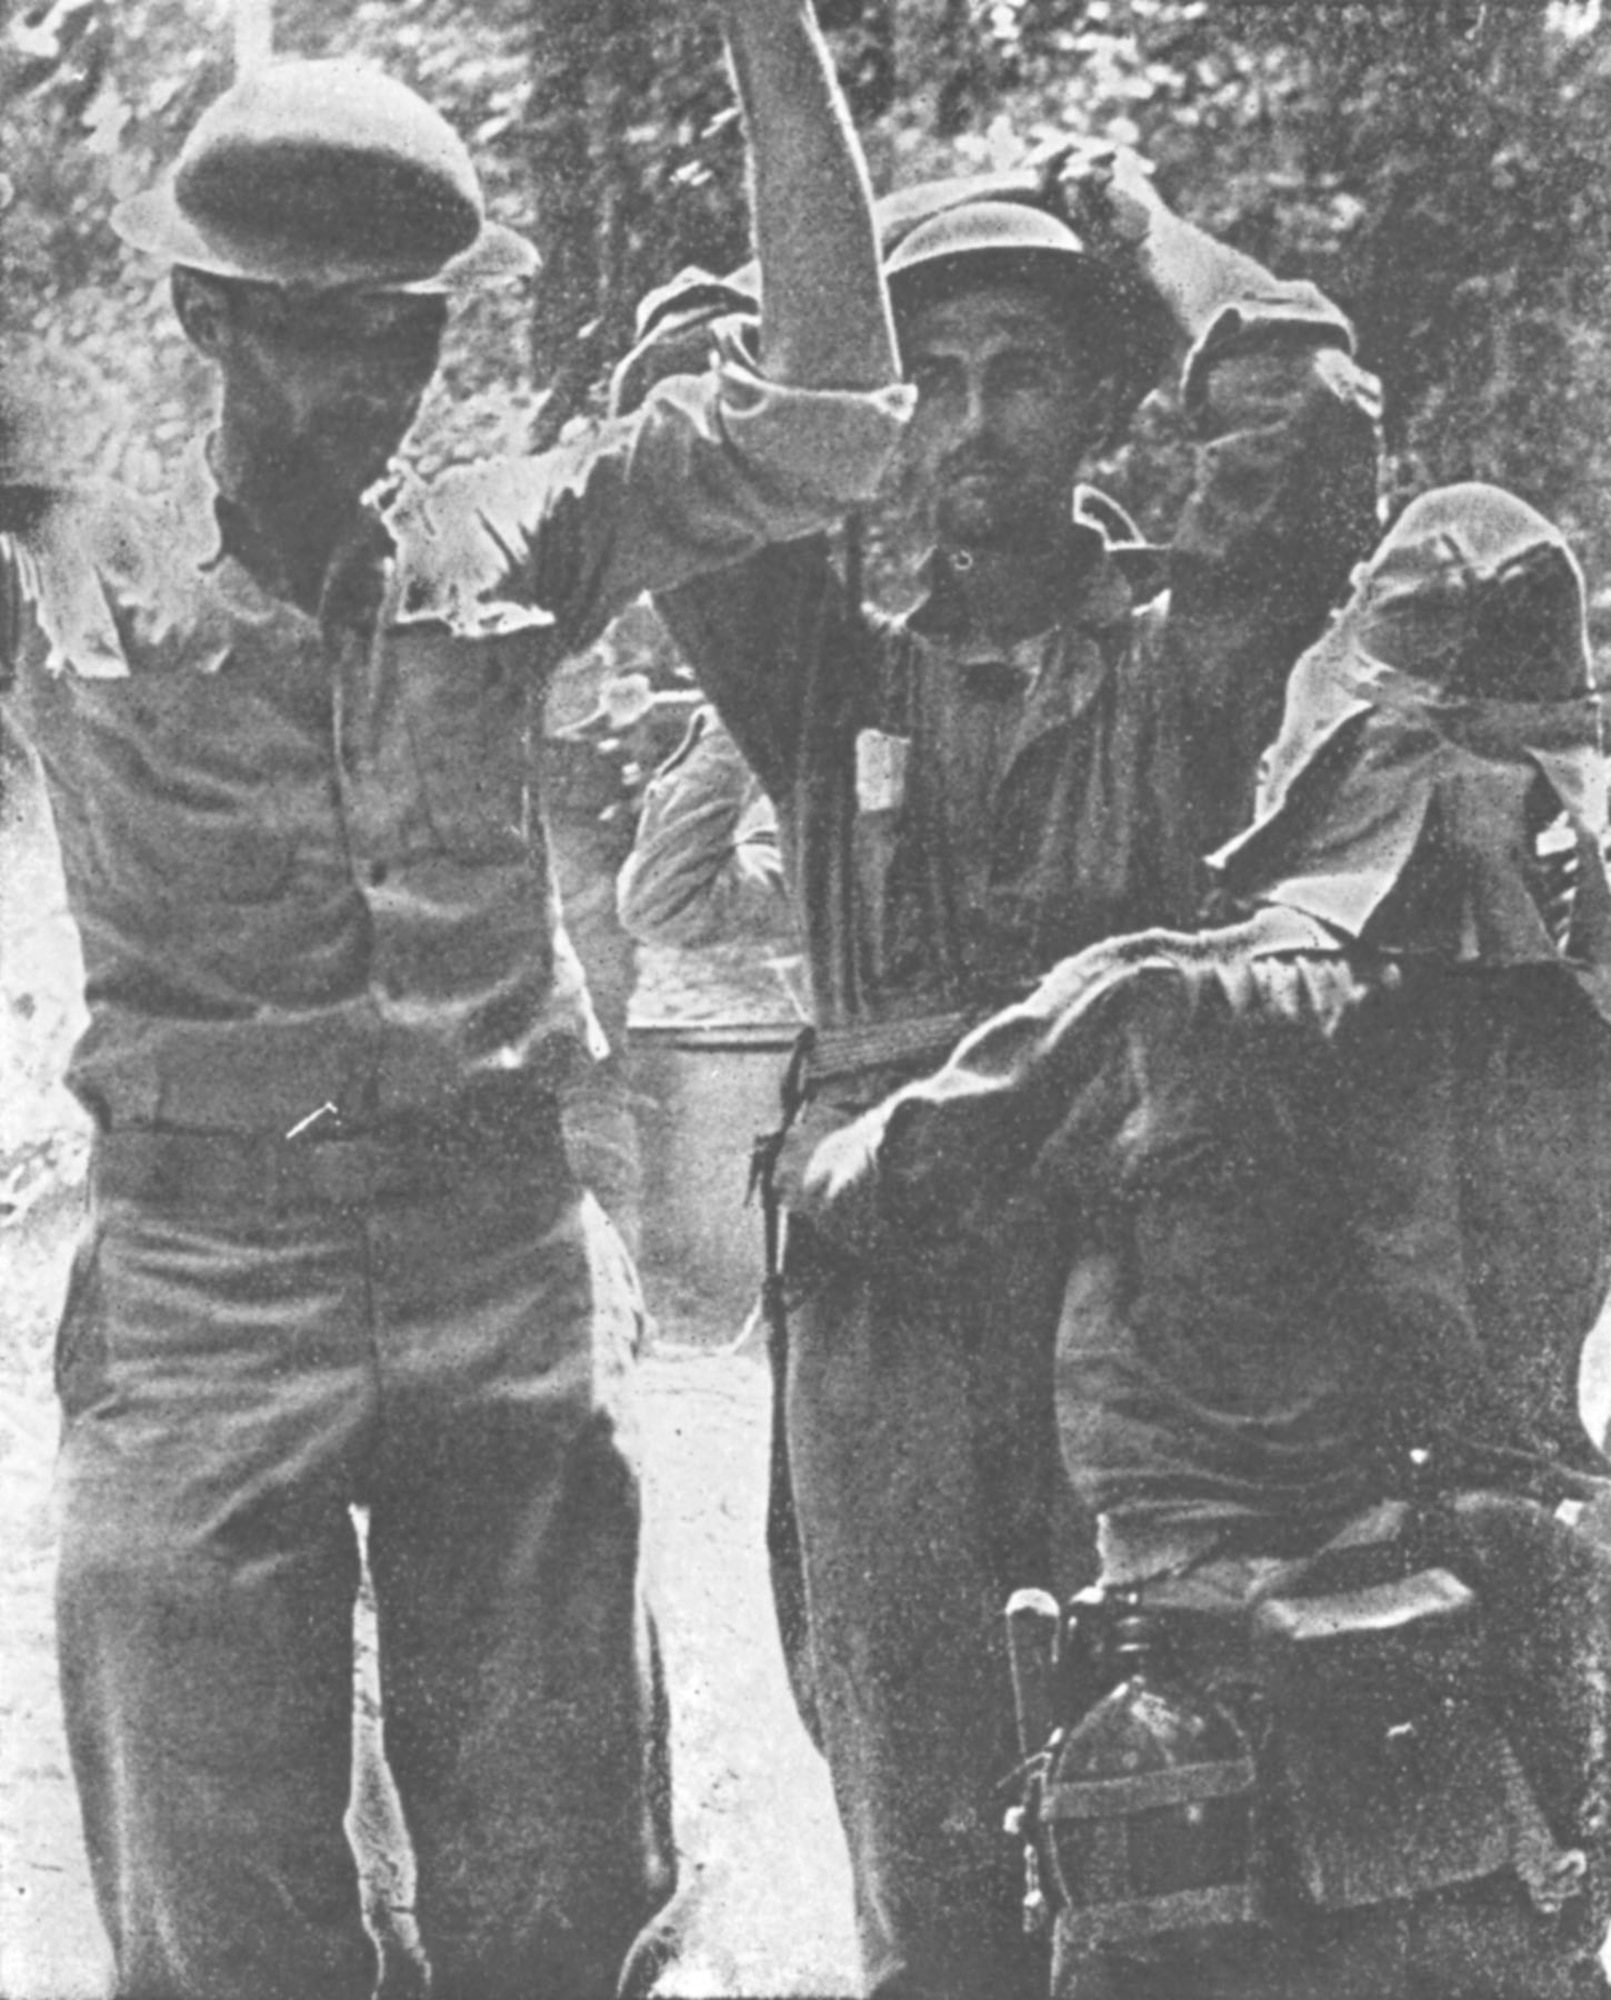 American servicemen surrender to the Japanese and begin the Death March. (U.S. Air Force photo)